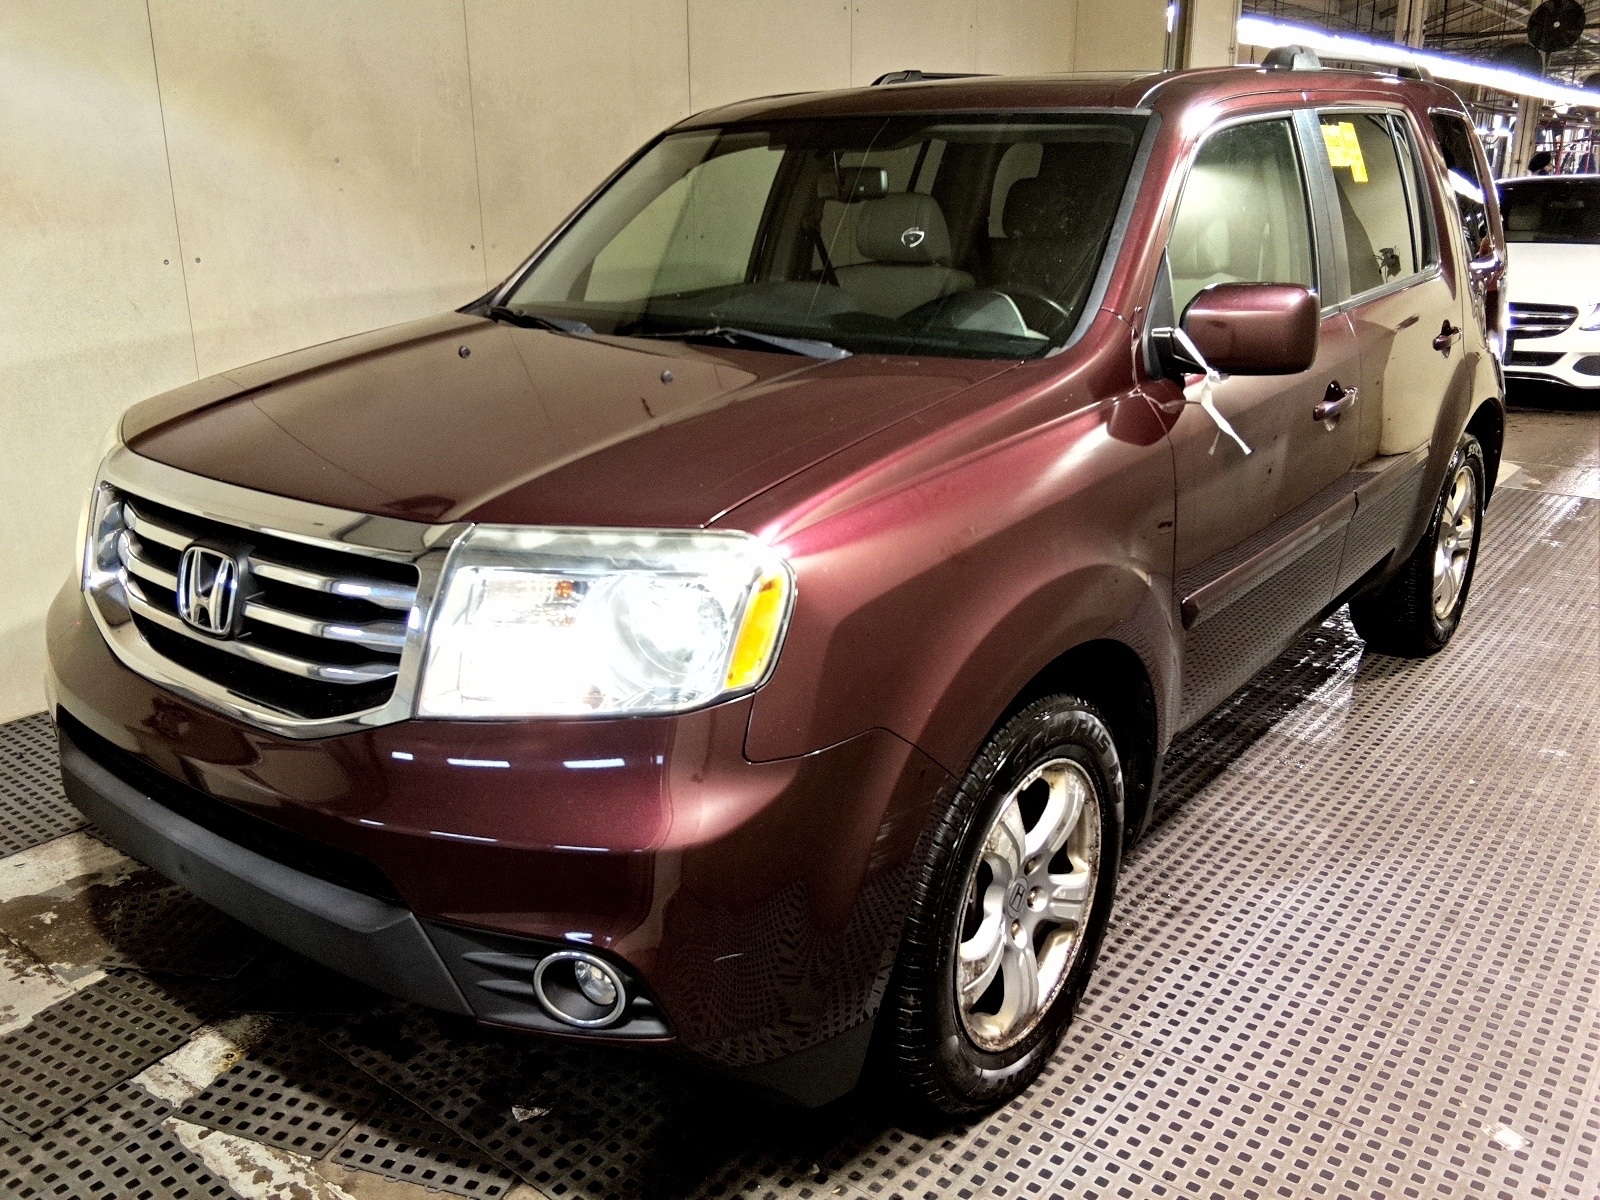 2013 Honda Pilot 4WD EX-L Certified Clean CarFax Trades Welcome!   